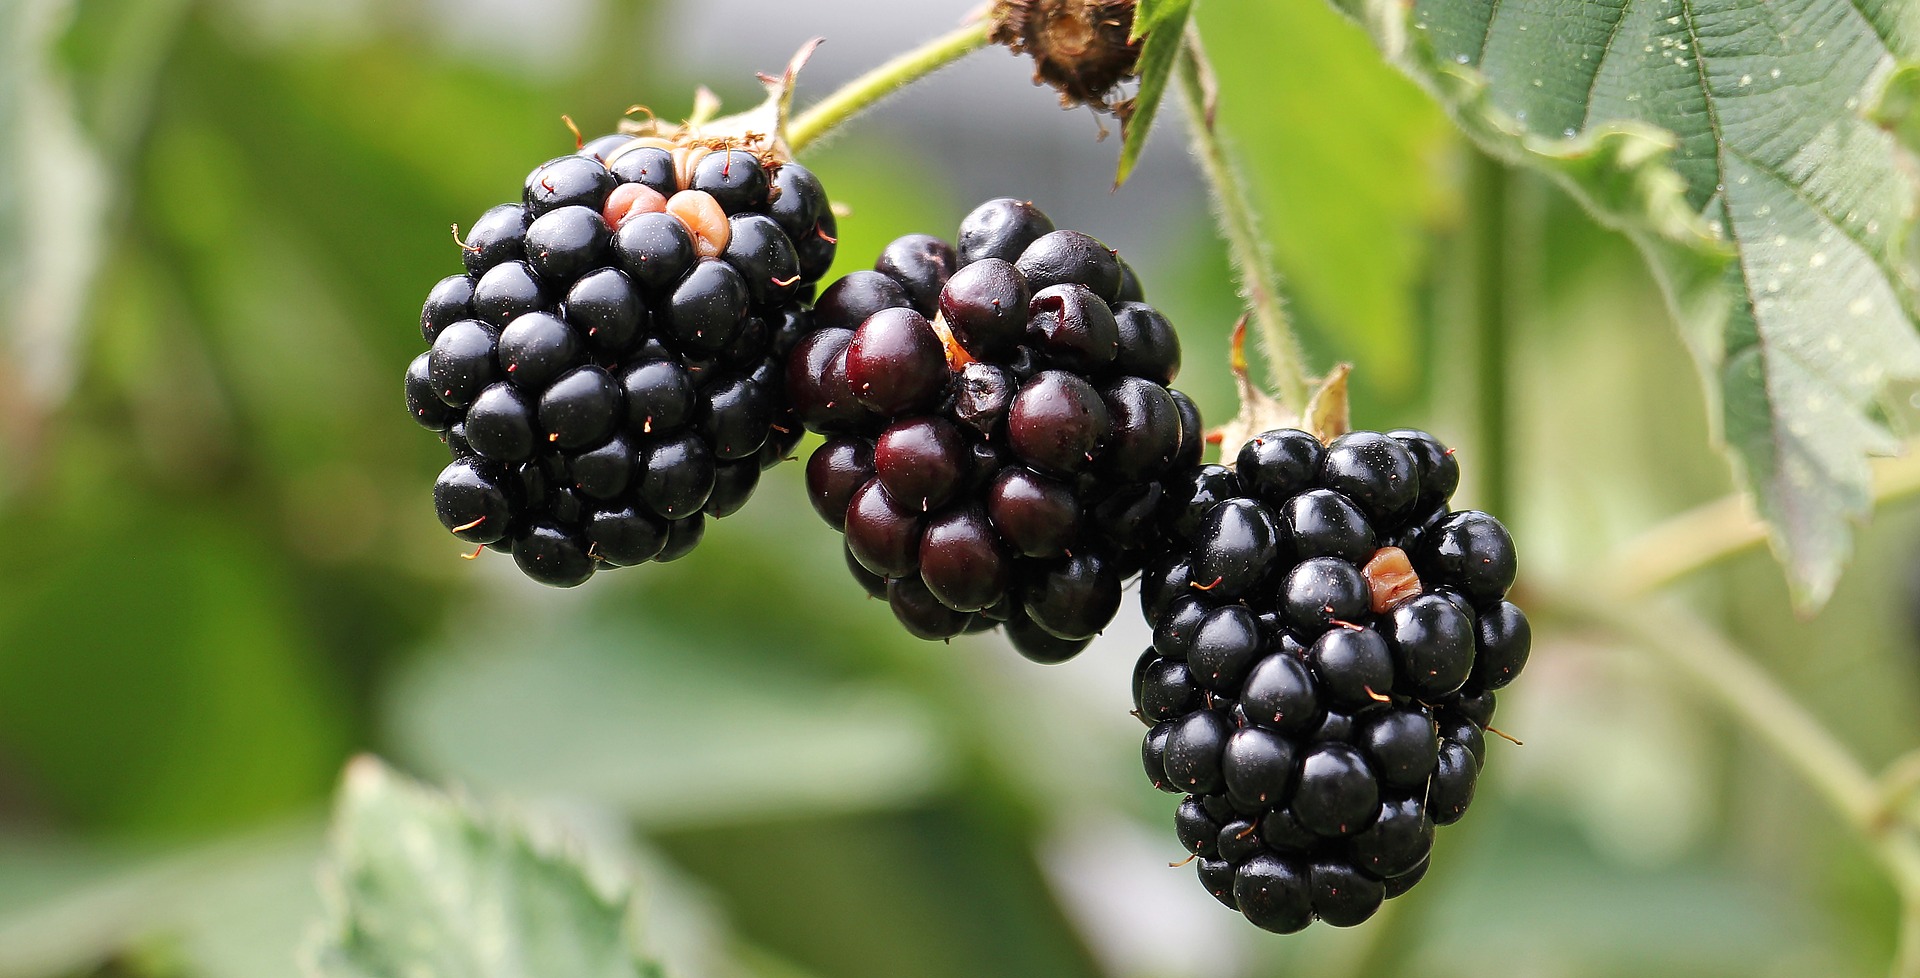 black berries need to harvest yourself garden you tend to